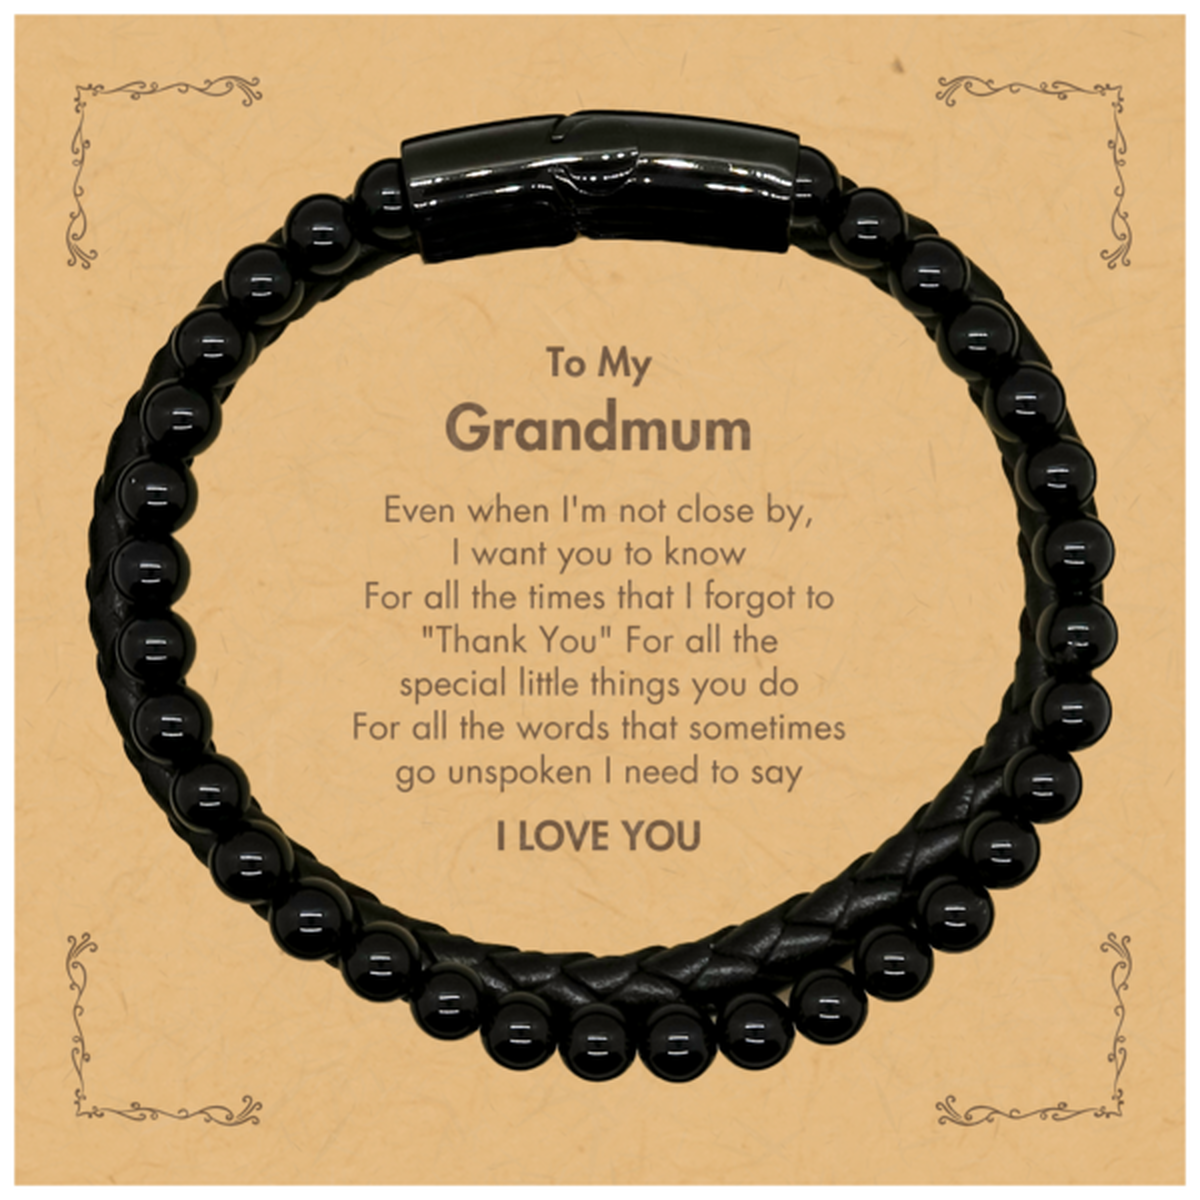 Thank You Gifts for Grandmum, Keepsake Stone Leather Bracelets Gifts for Grandmum Birthday Mother's day Father's Day Grandmum For all the words That sometimes go unspoken I need to say I LOVE YOU